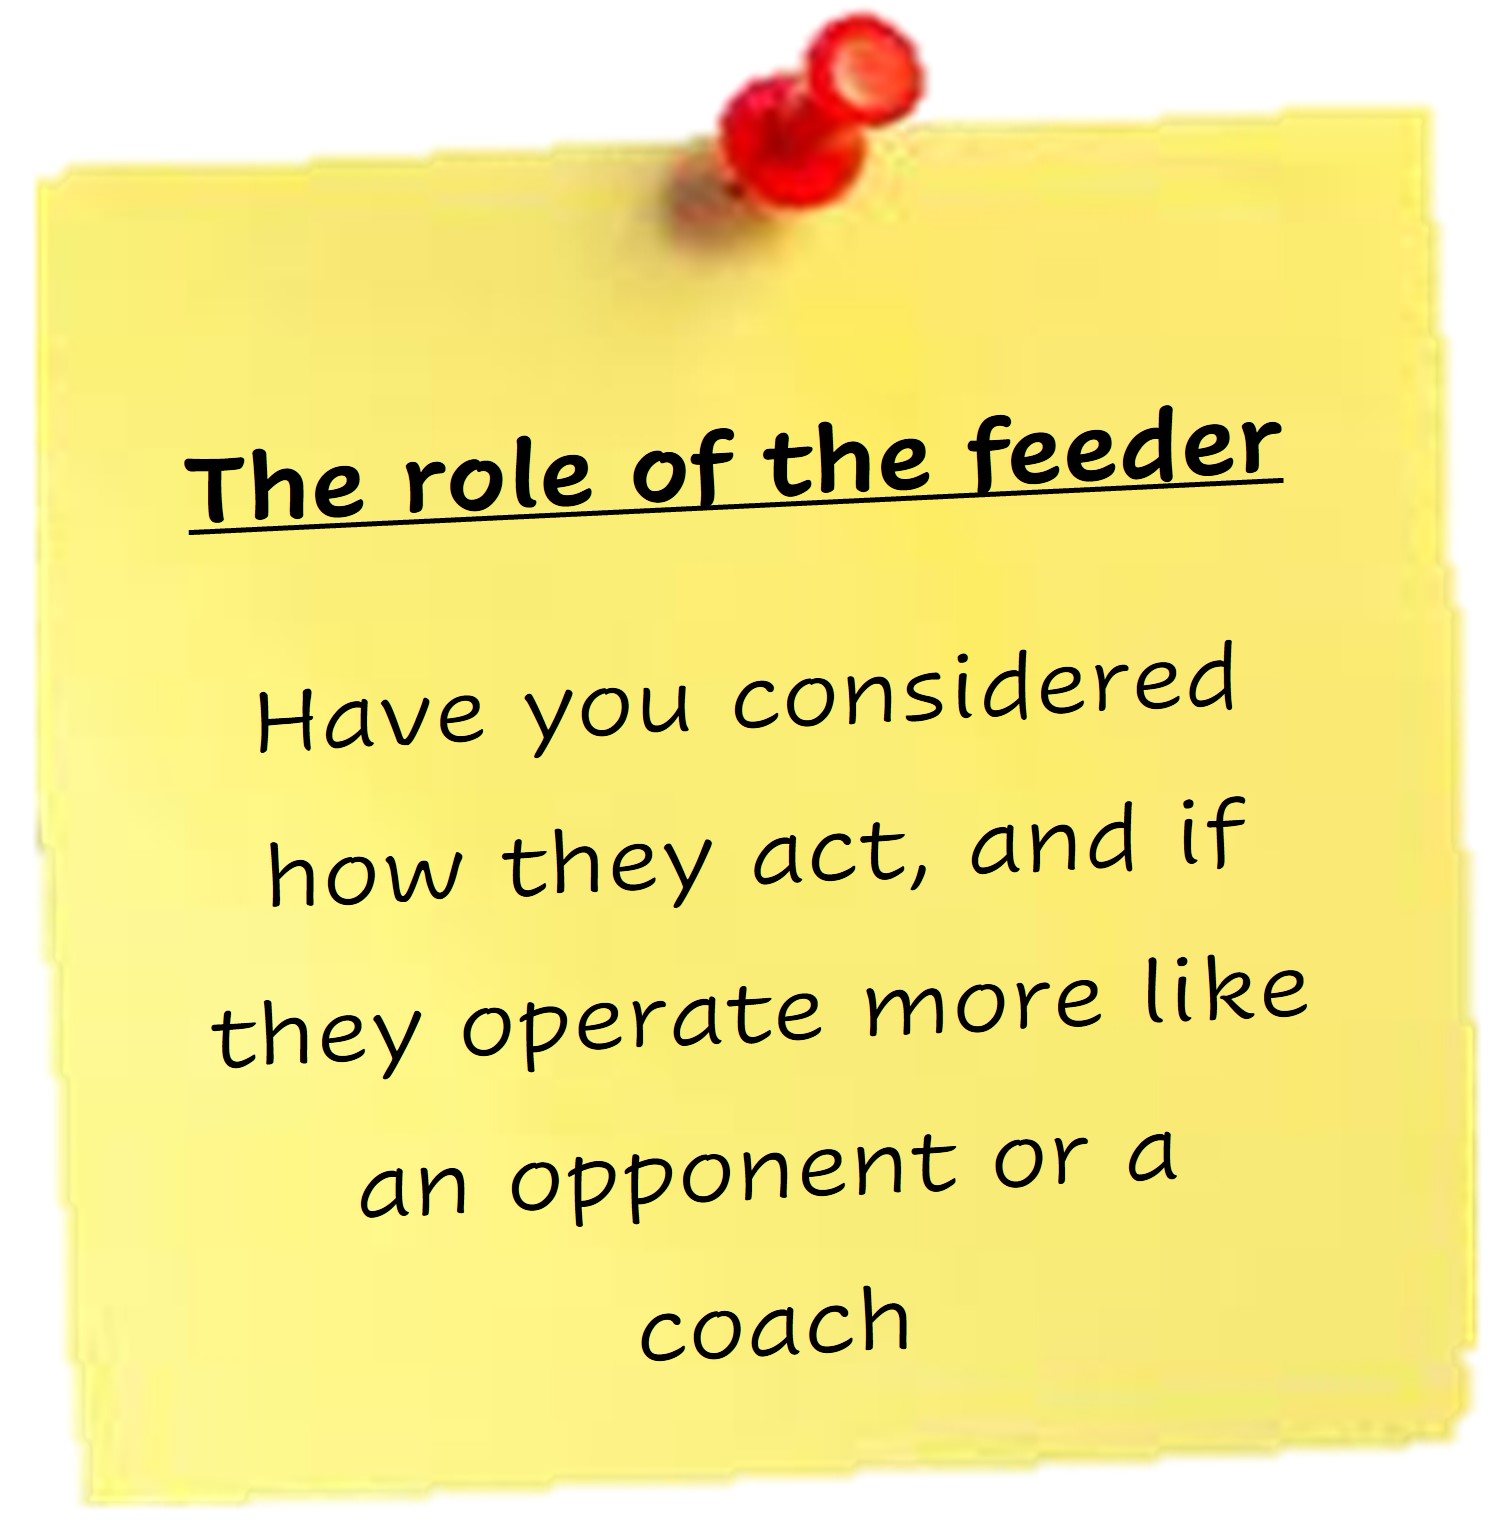 Considering the role of the feeder in badminton multi shuttle